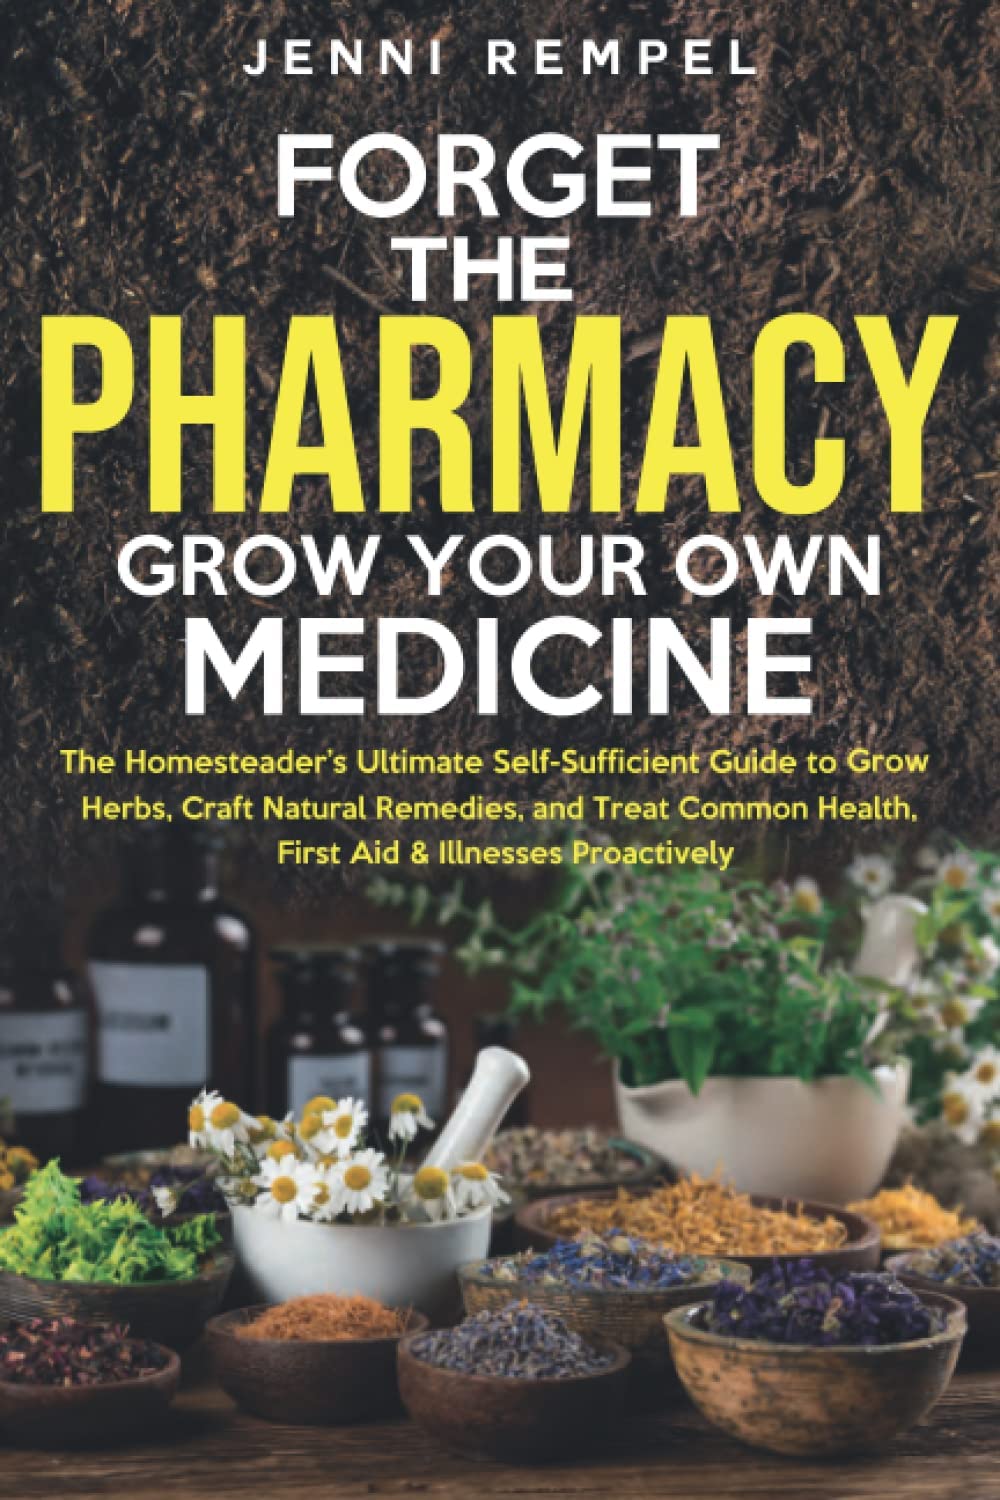 Forget The Pharmacy – Grow Your Own Medicine: The Homesteader’s Ultimate Self-Sufficient Guide to Grow Herbs, Craft Natural Remedies, and Treat Common … Proactively (The Homesteader Herbs Series)